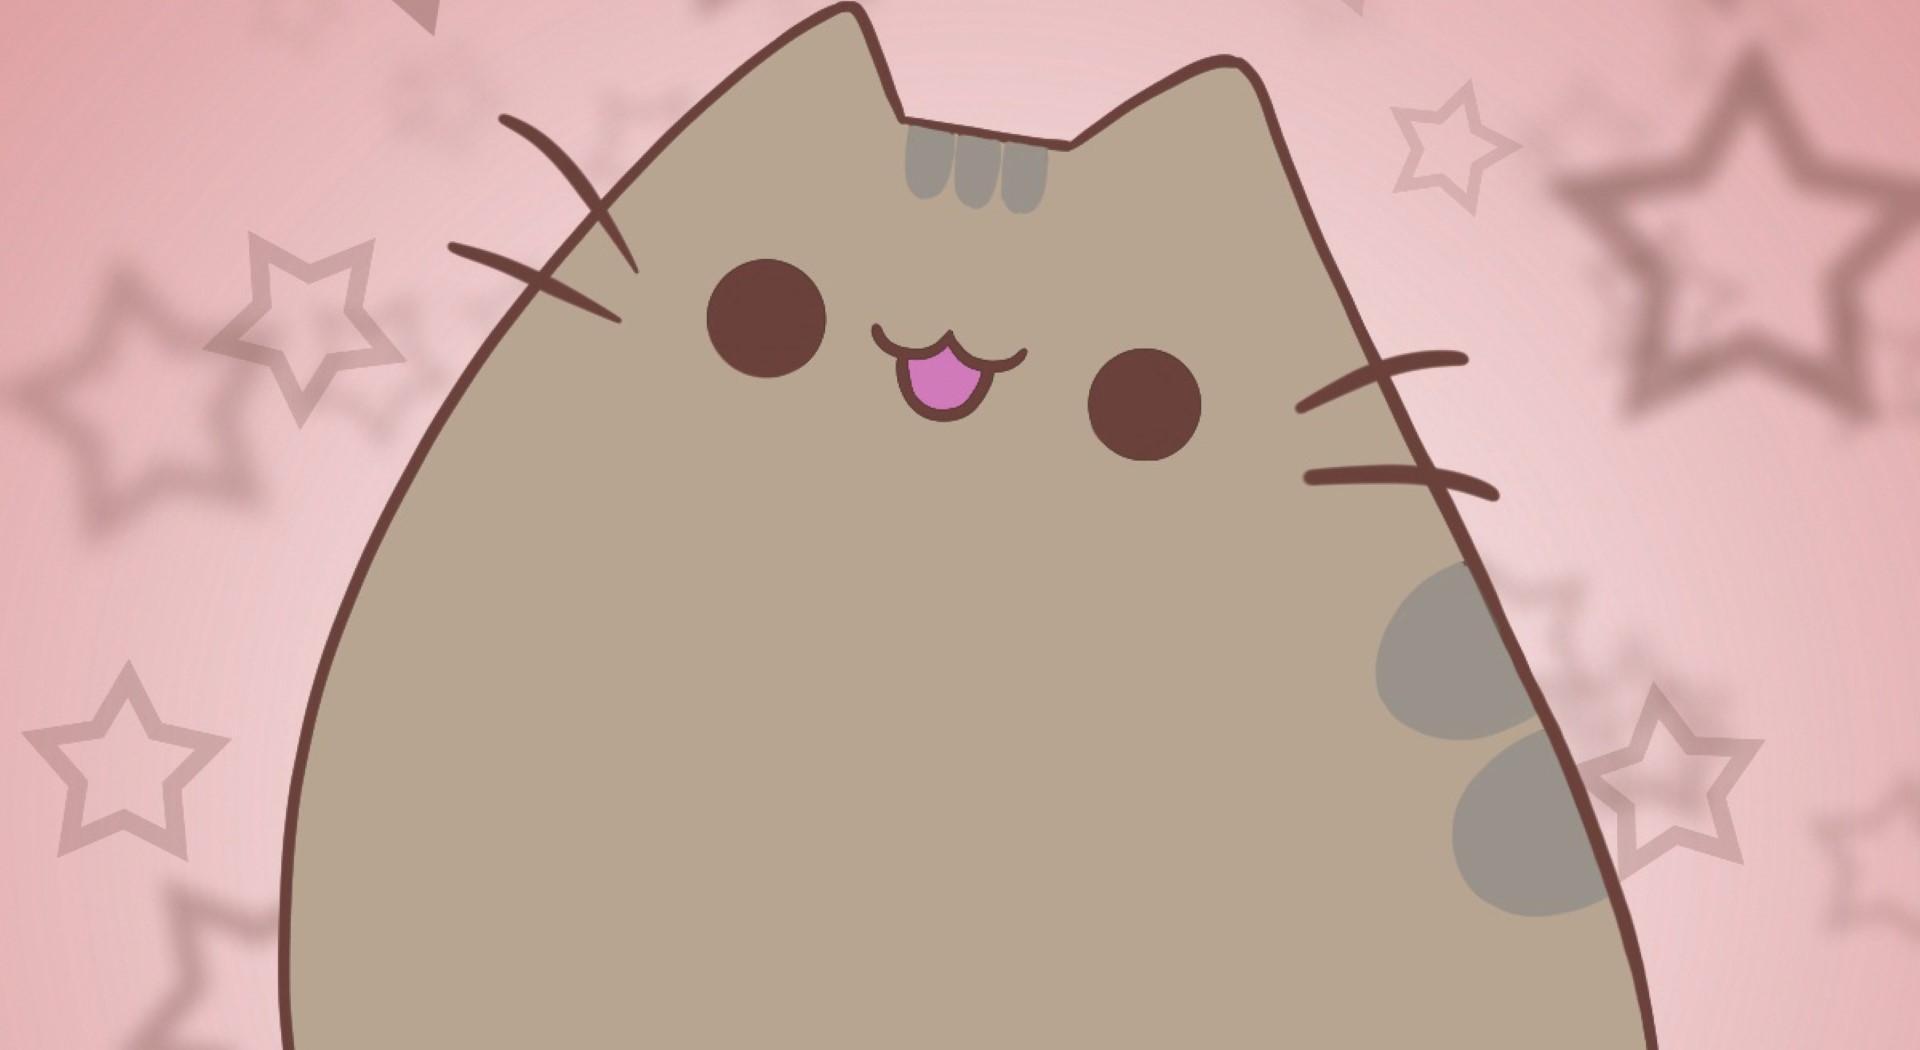 How To Draw Pusheen - Draw Central